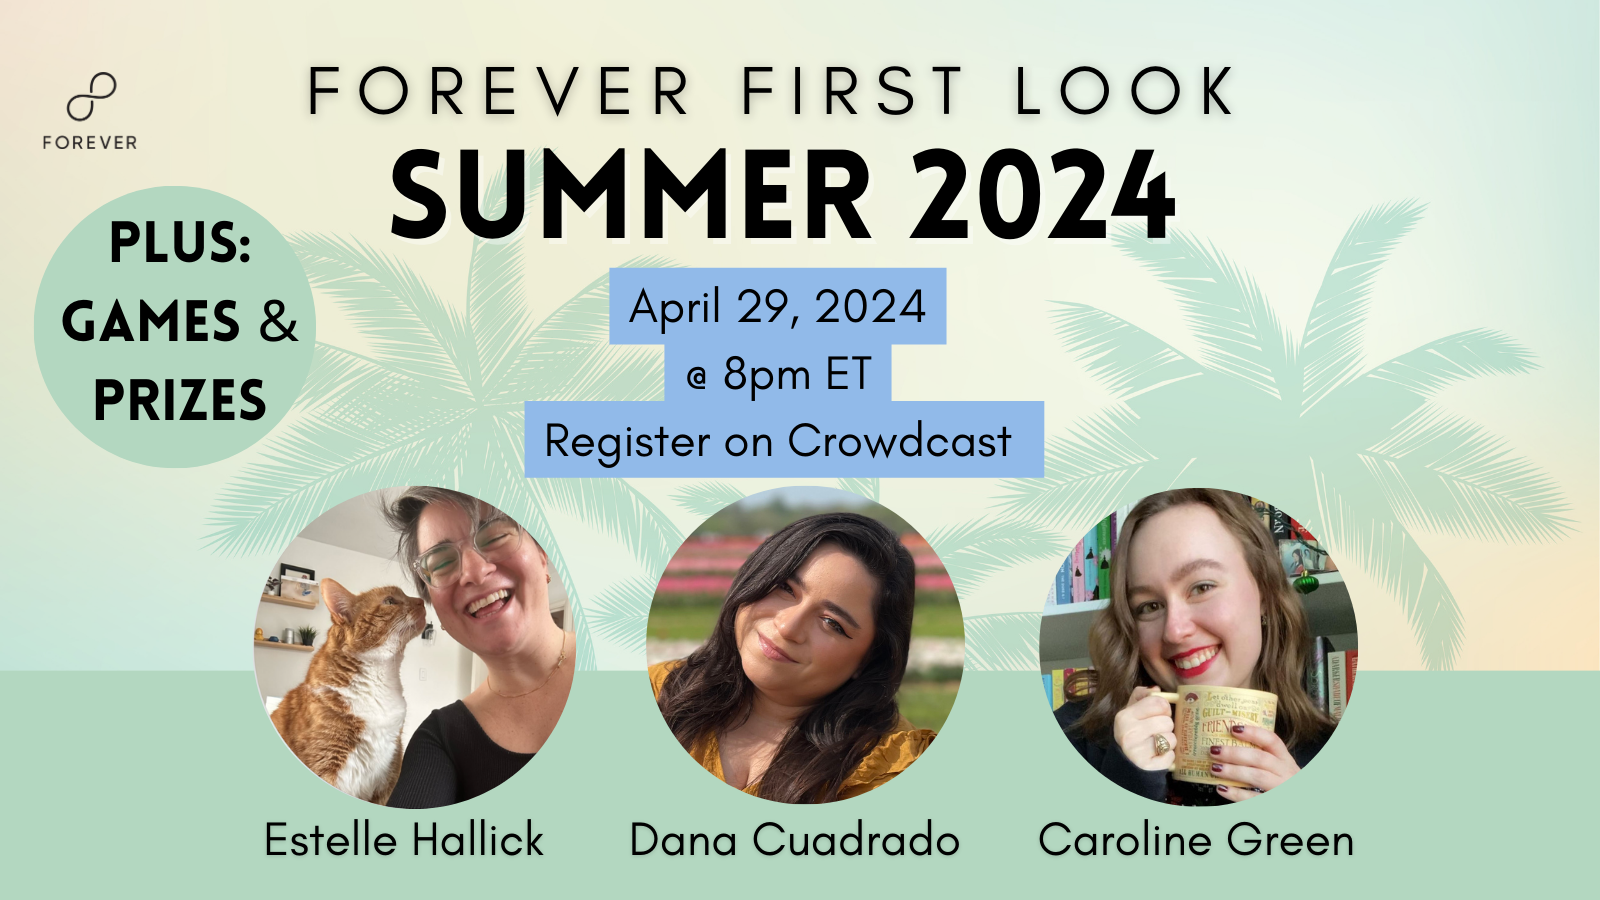 Forever First Look Summer 2024 event cover photo